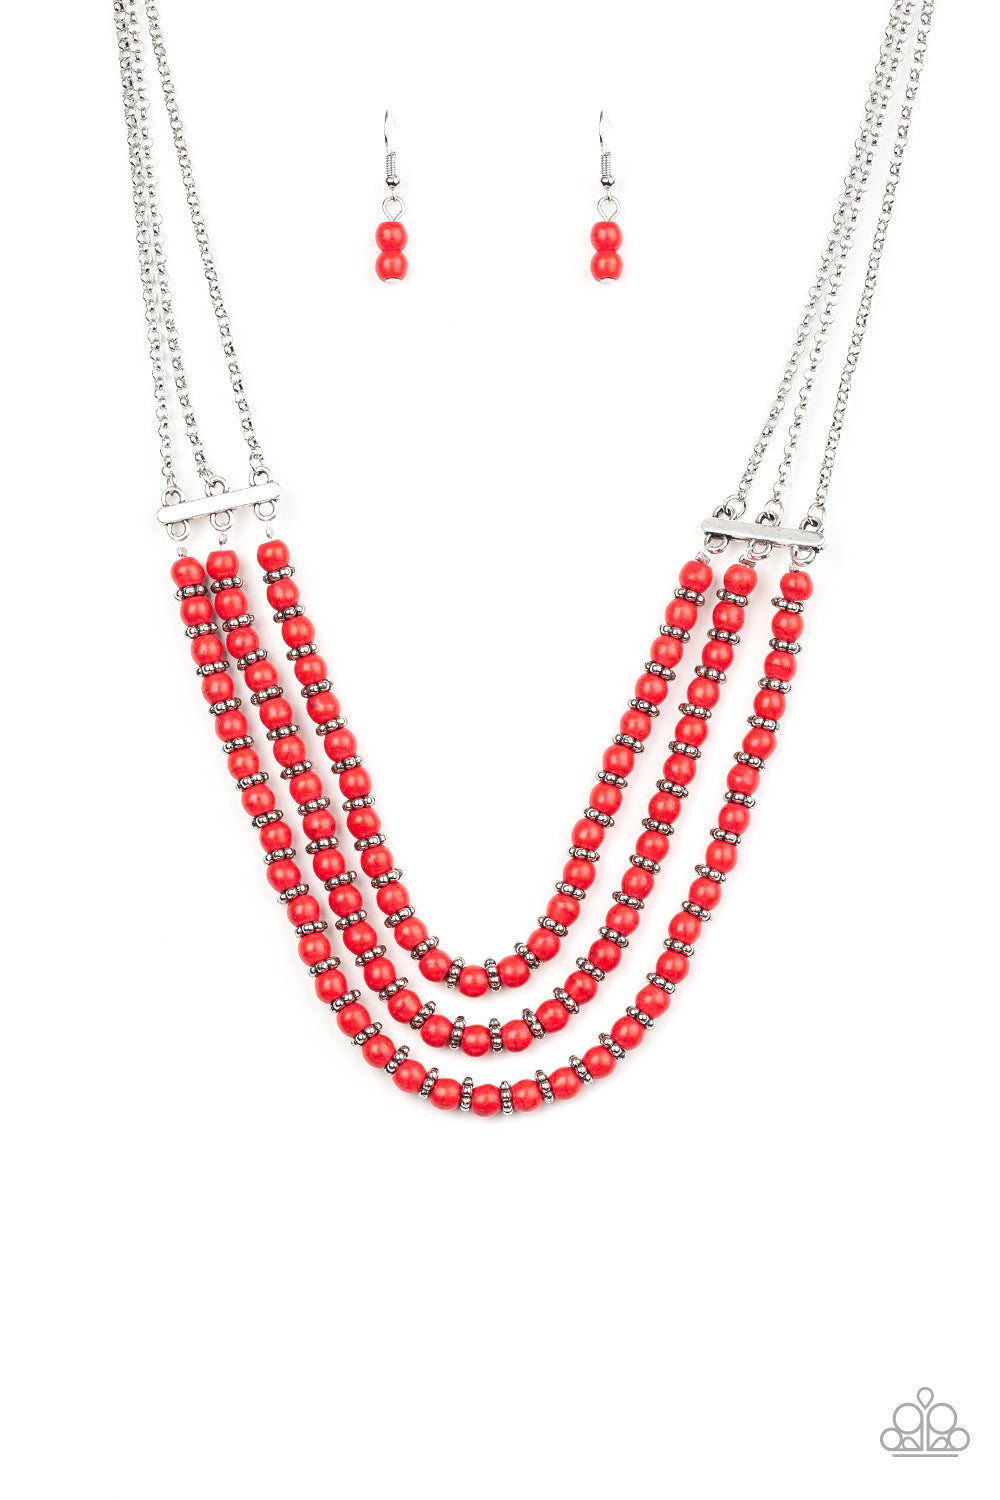 Paparazzi Accessories - Terra Trails - Red Necklace - Alies Bling Bar